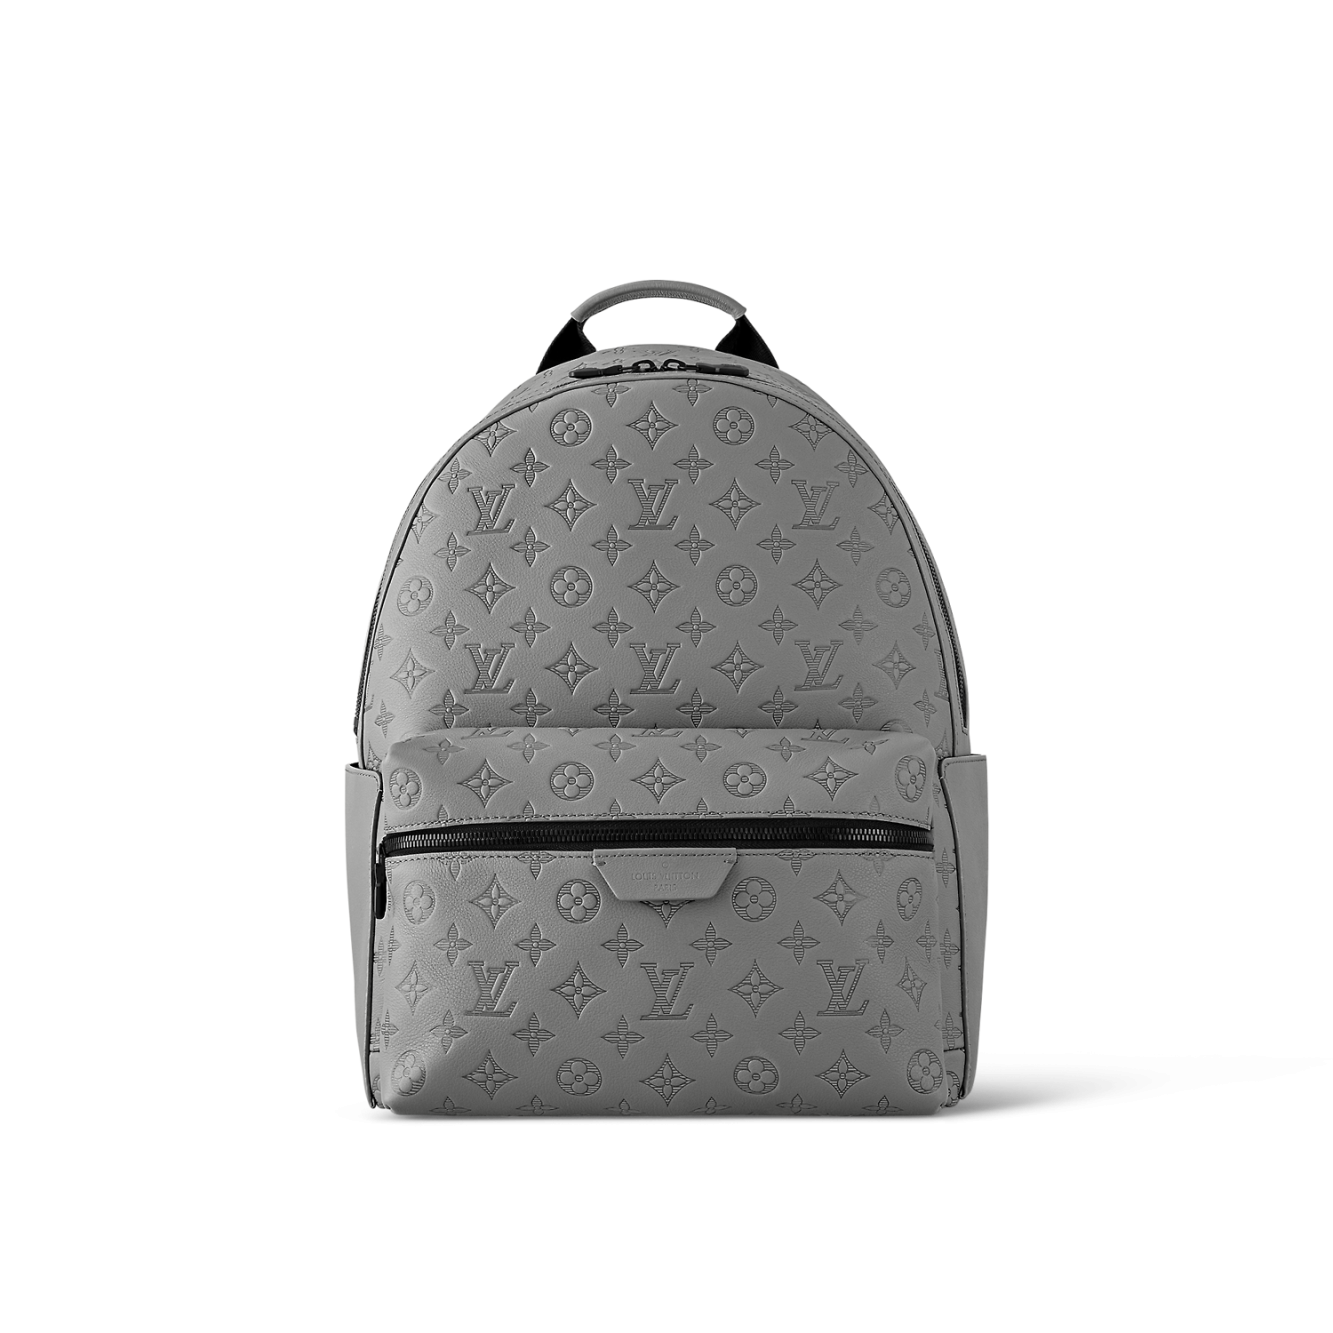 discovery backpack louis vuittons